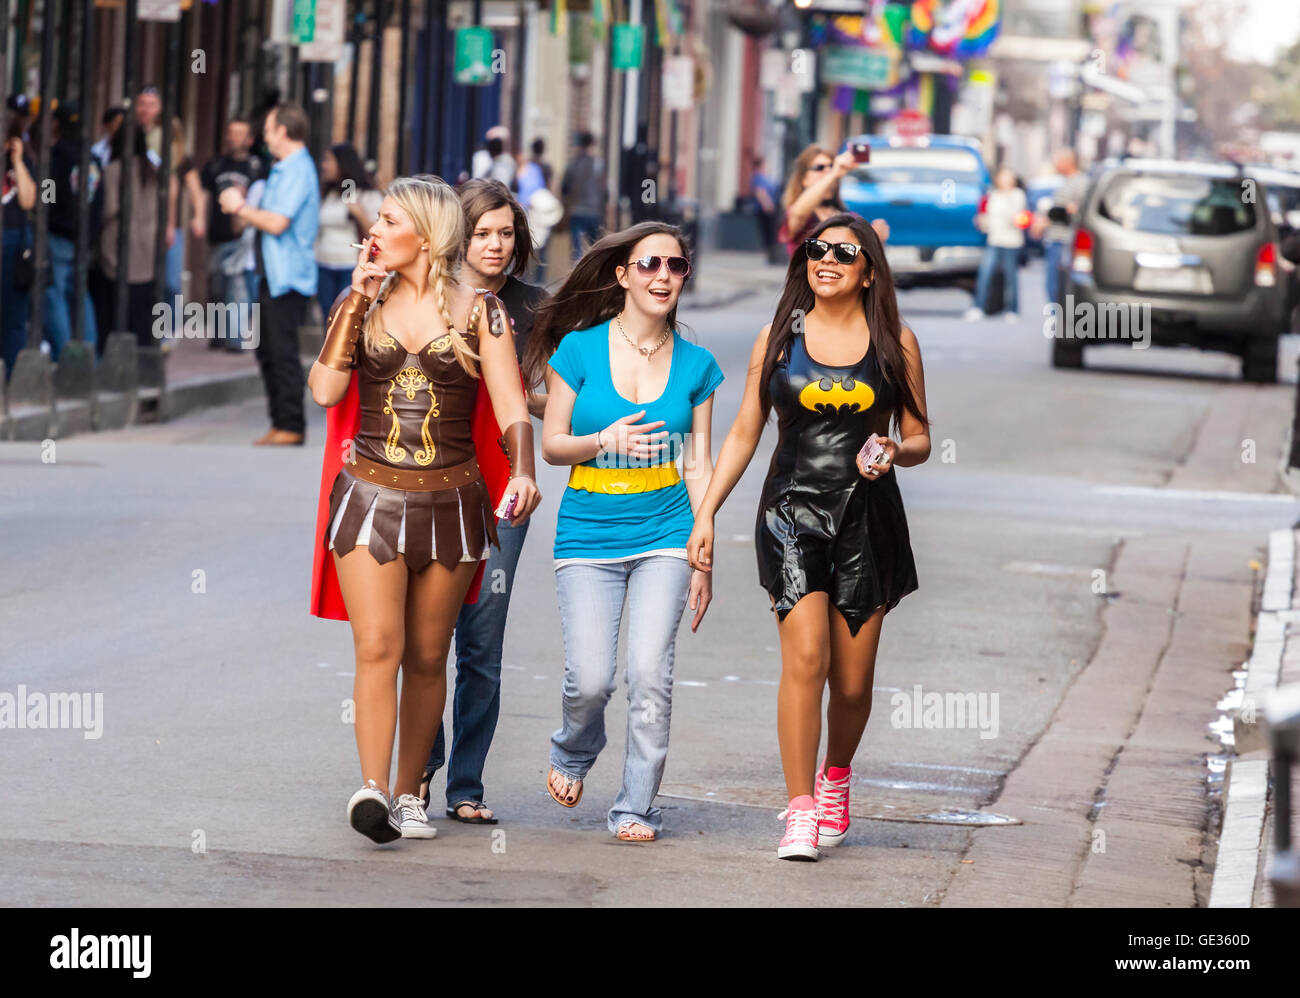 Women wearing funny costumes celebrating famous Mardi Gras carnival on the street in French Quarter. Stock Photo